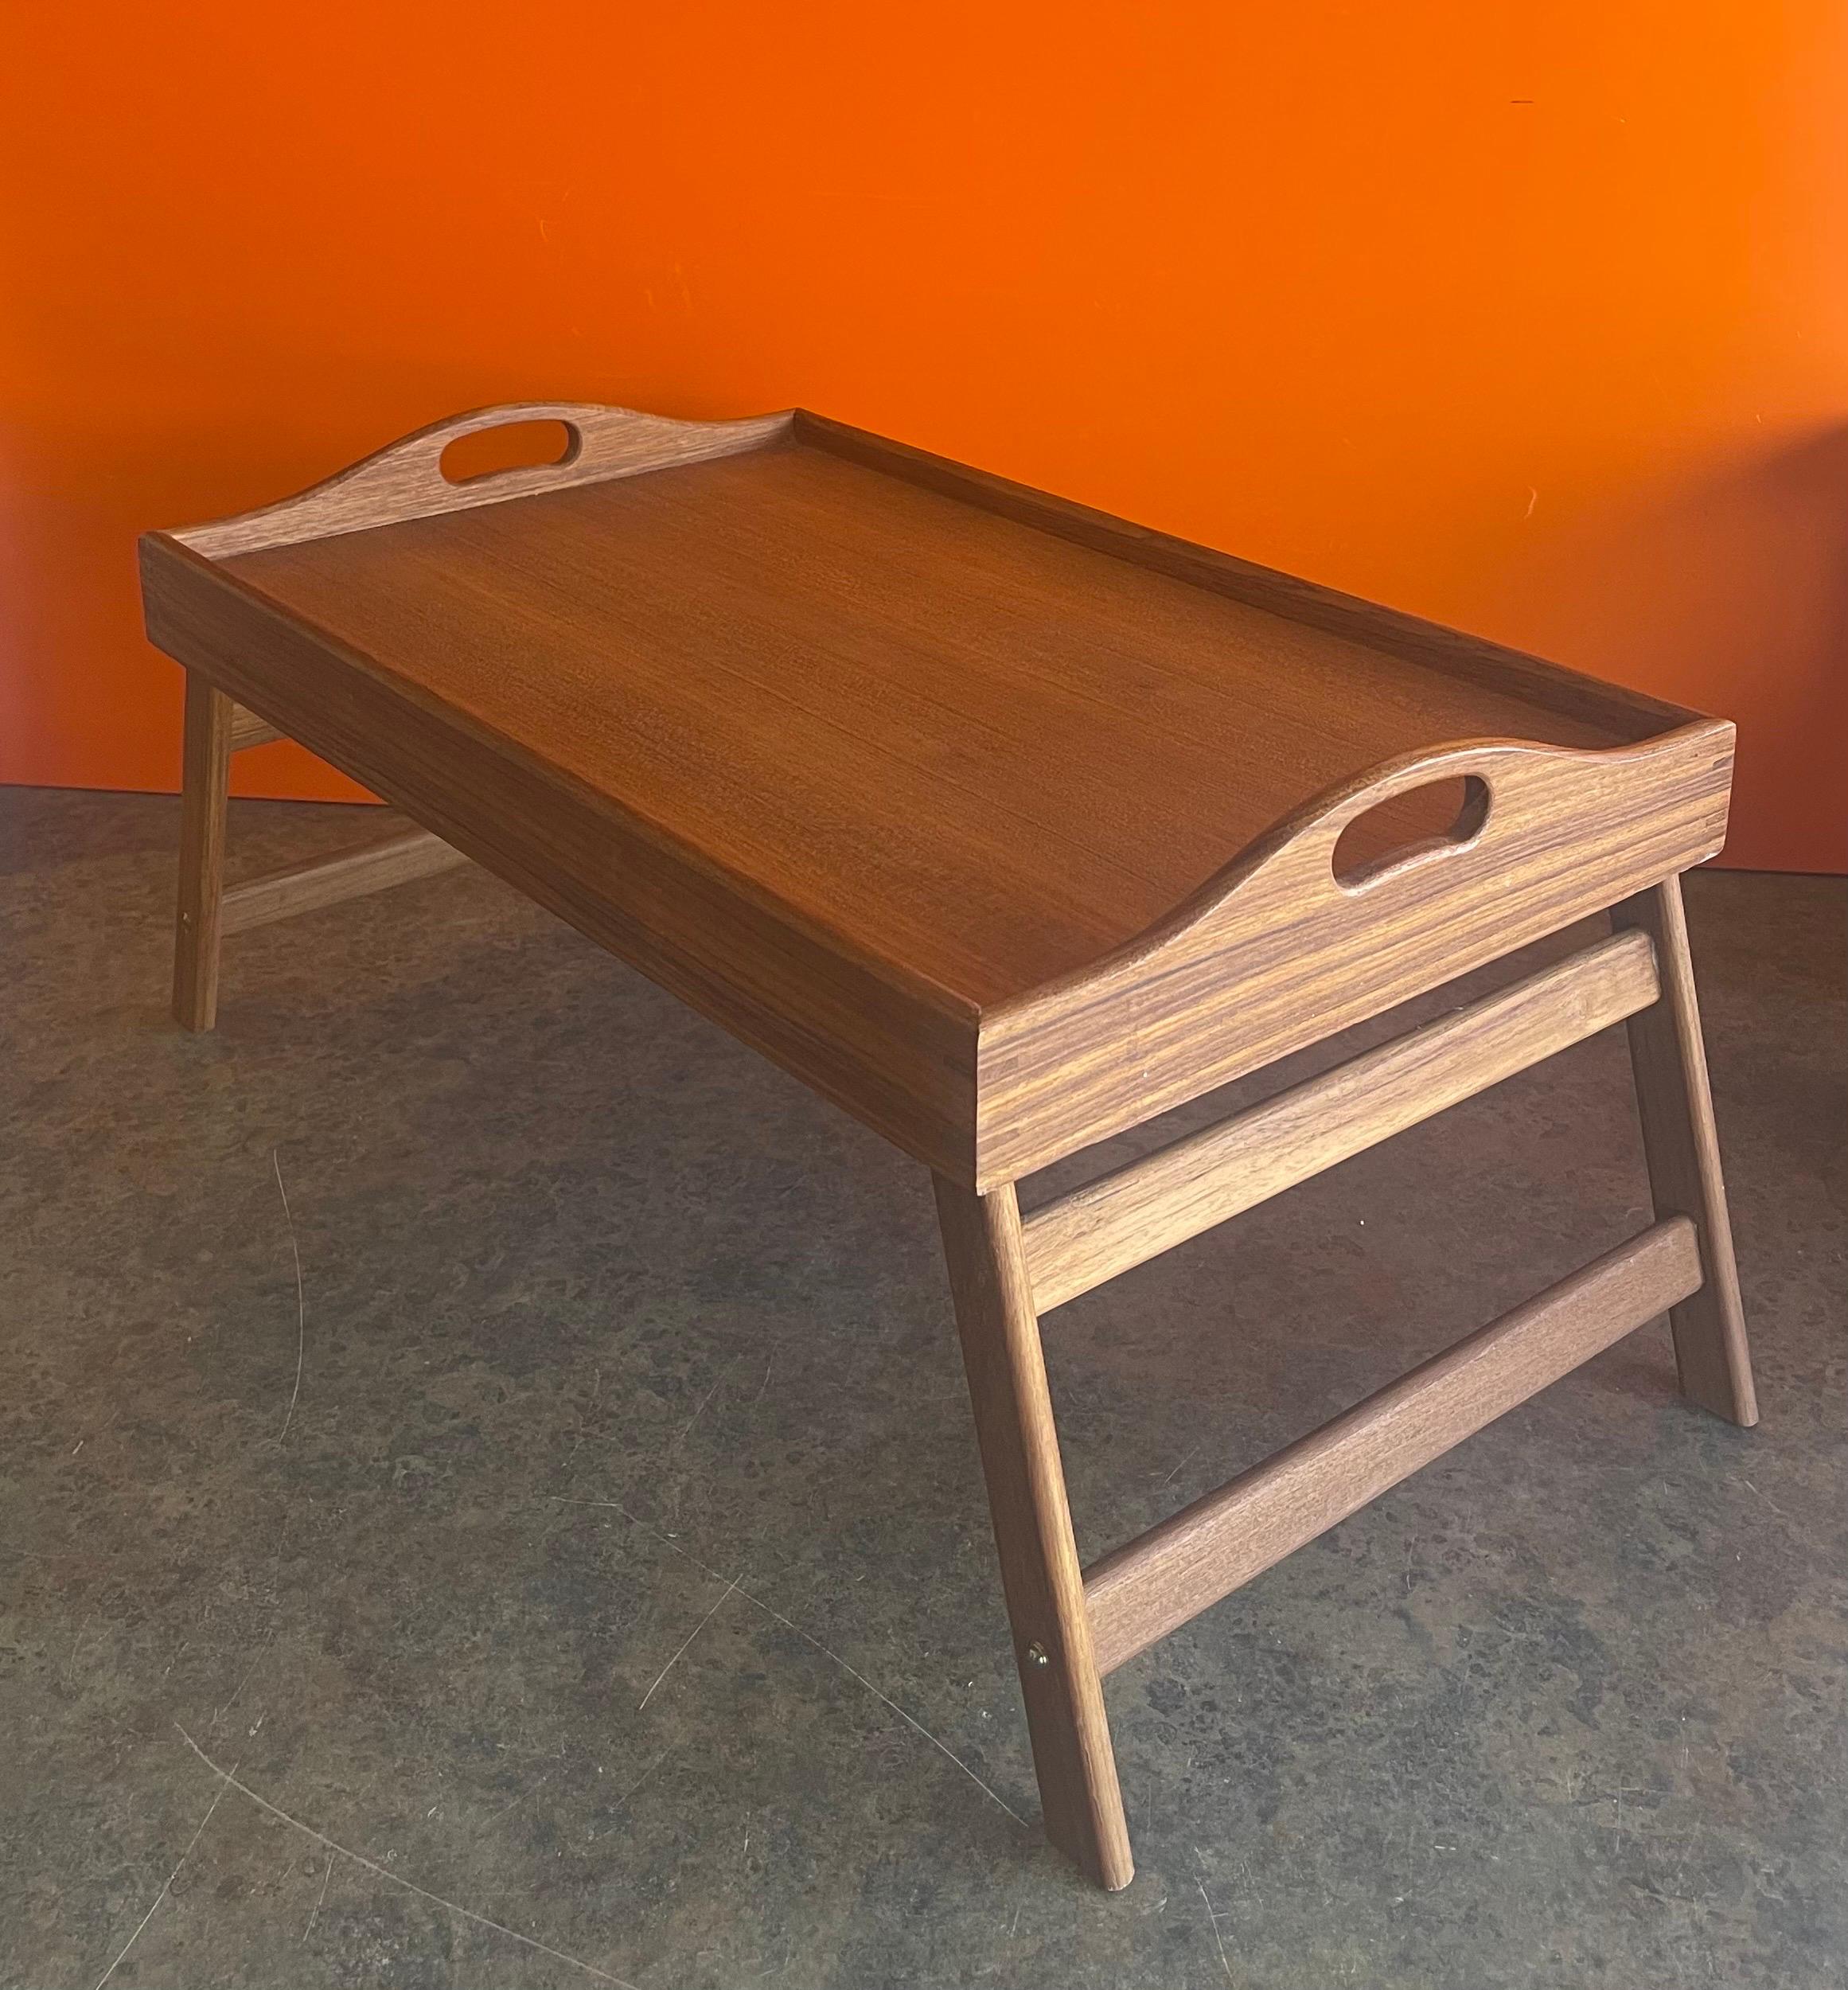 Versatile Danish modern folding teak bed / breakfast tray, circa 1980s. The tray can be used for breakfast in bed with the two foldable legs or as a regular serving tray with the legs in the up position. The piece is in very good vintage condition